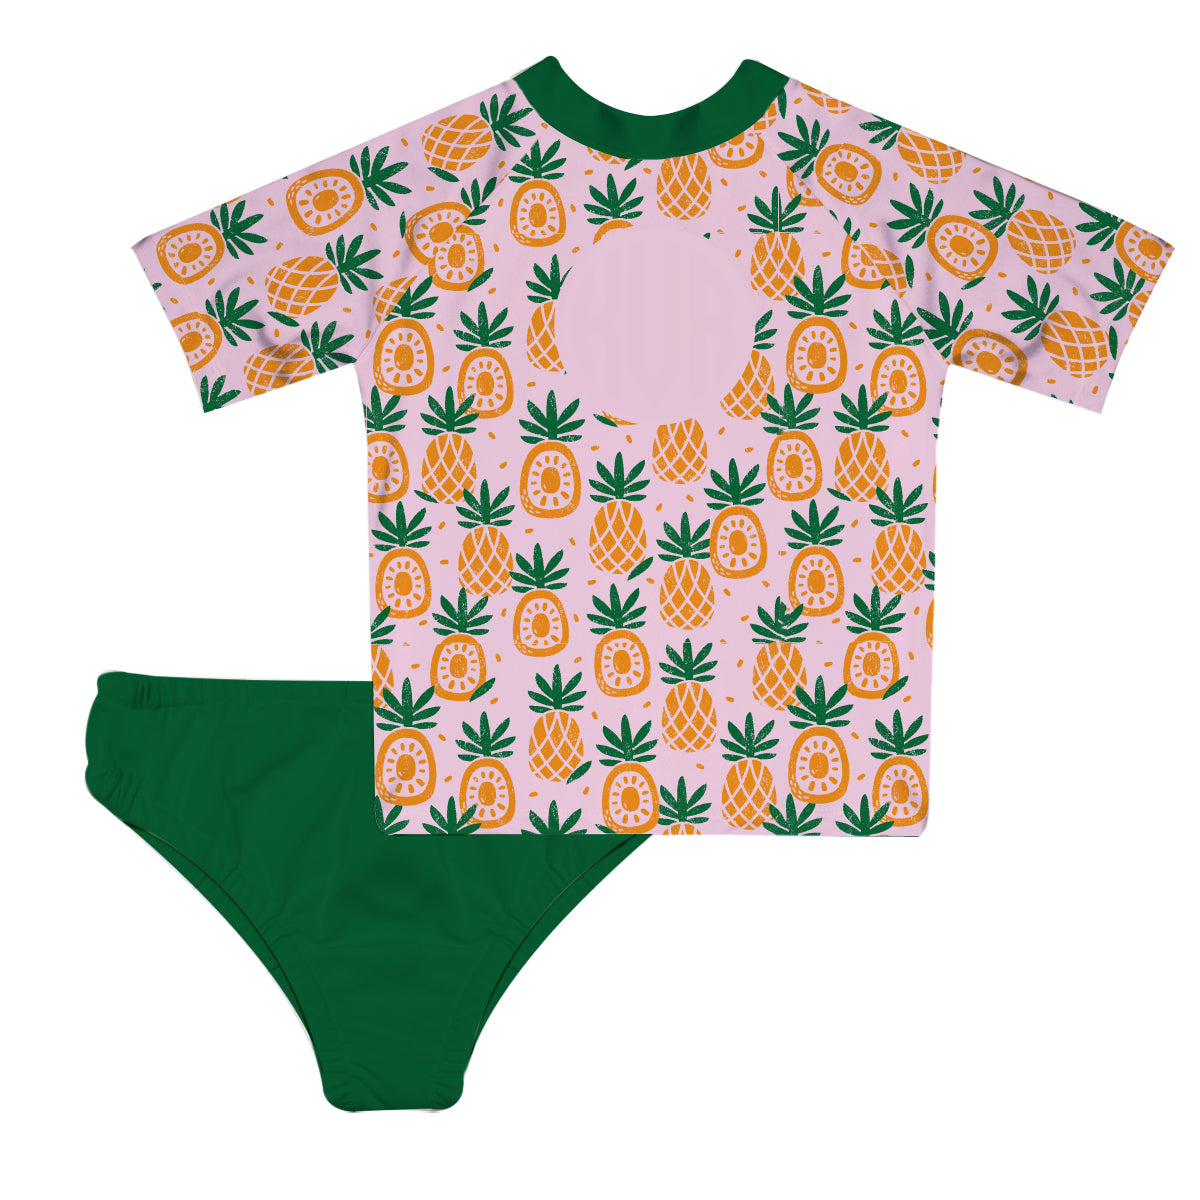 Pineapple Print Personalized Monogram Green and Pink 2pc Short Sleeve Rash Guard - Wimziy&Co.